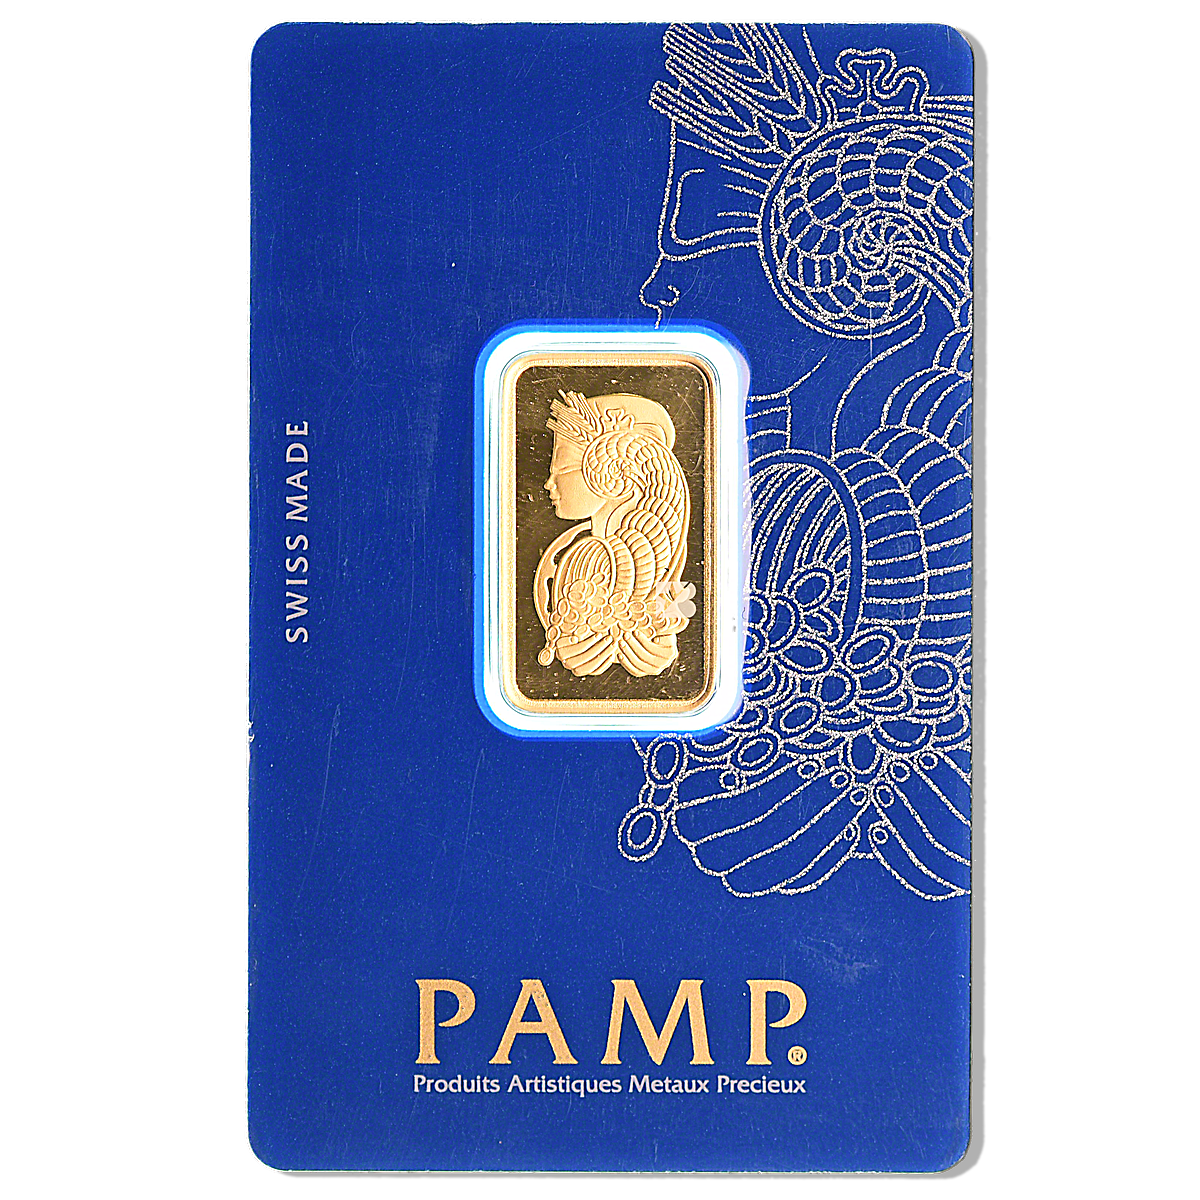 PAMP Gold Bar - 10 g | Gold Bars & Gold Coins in Singapore